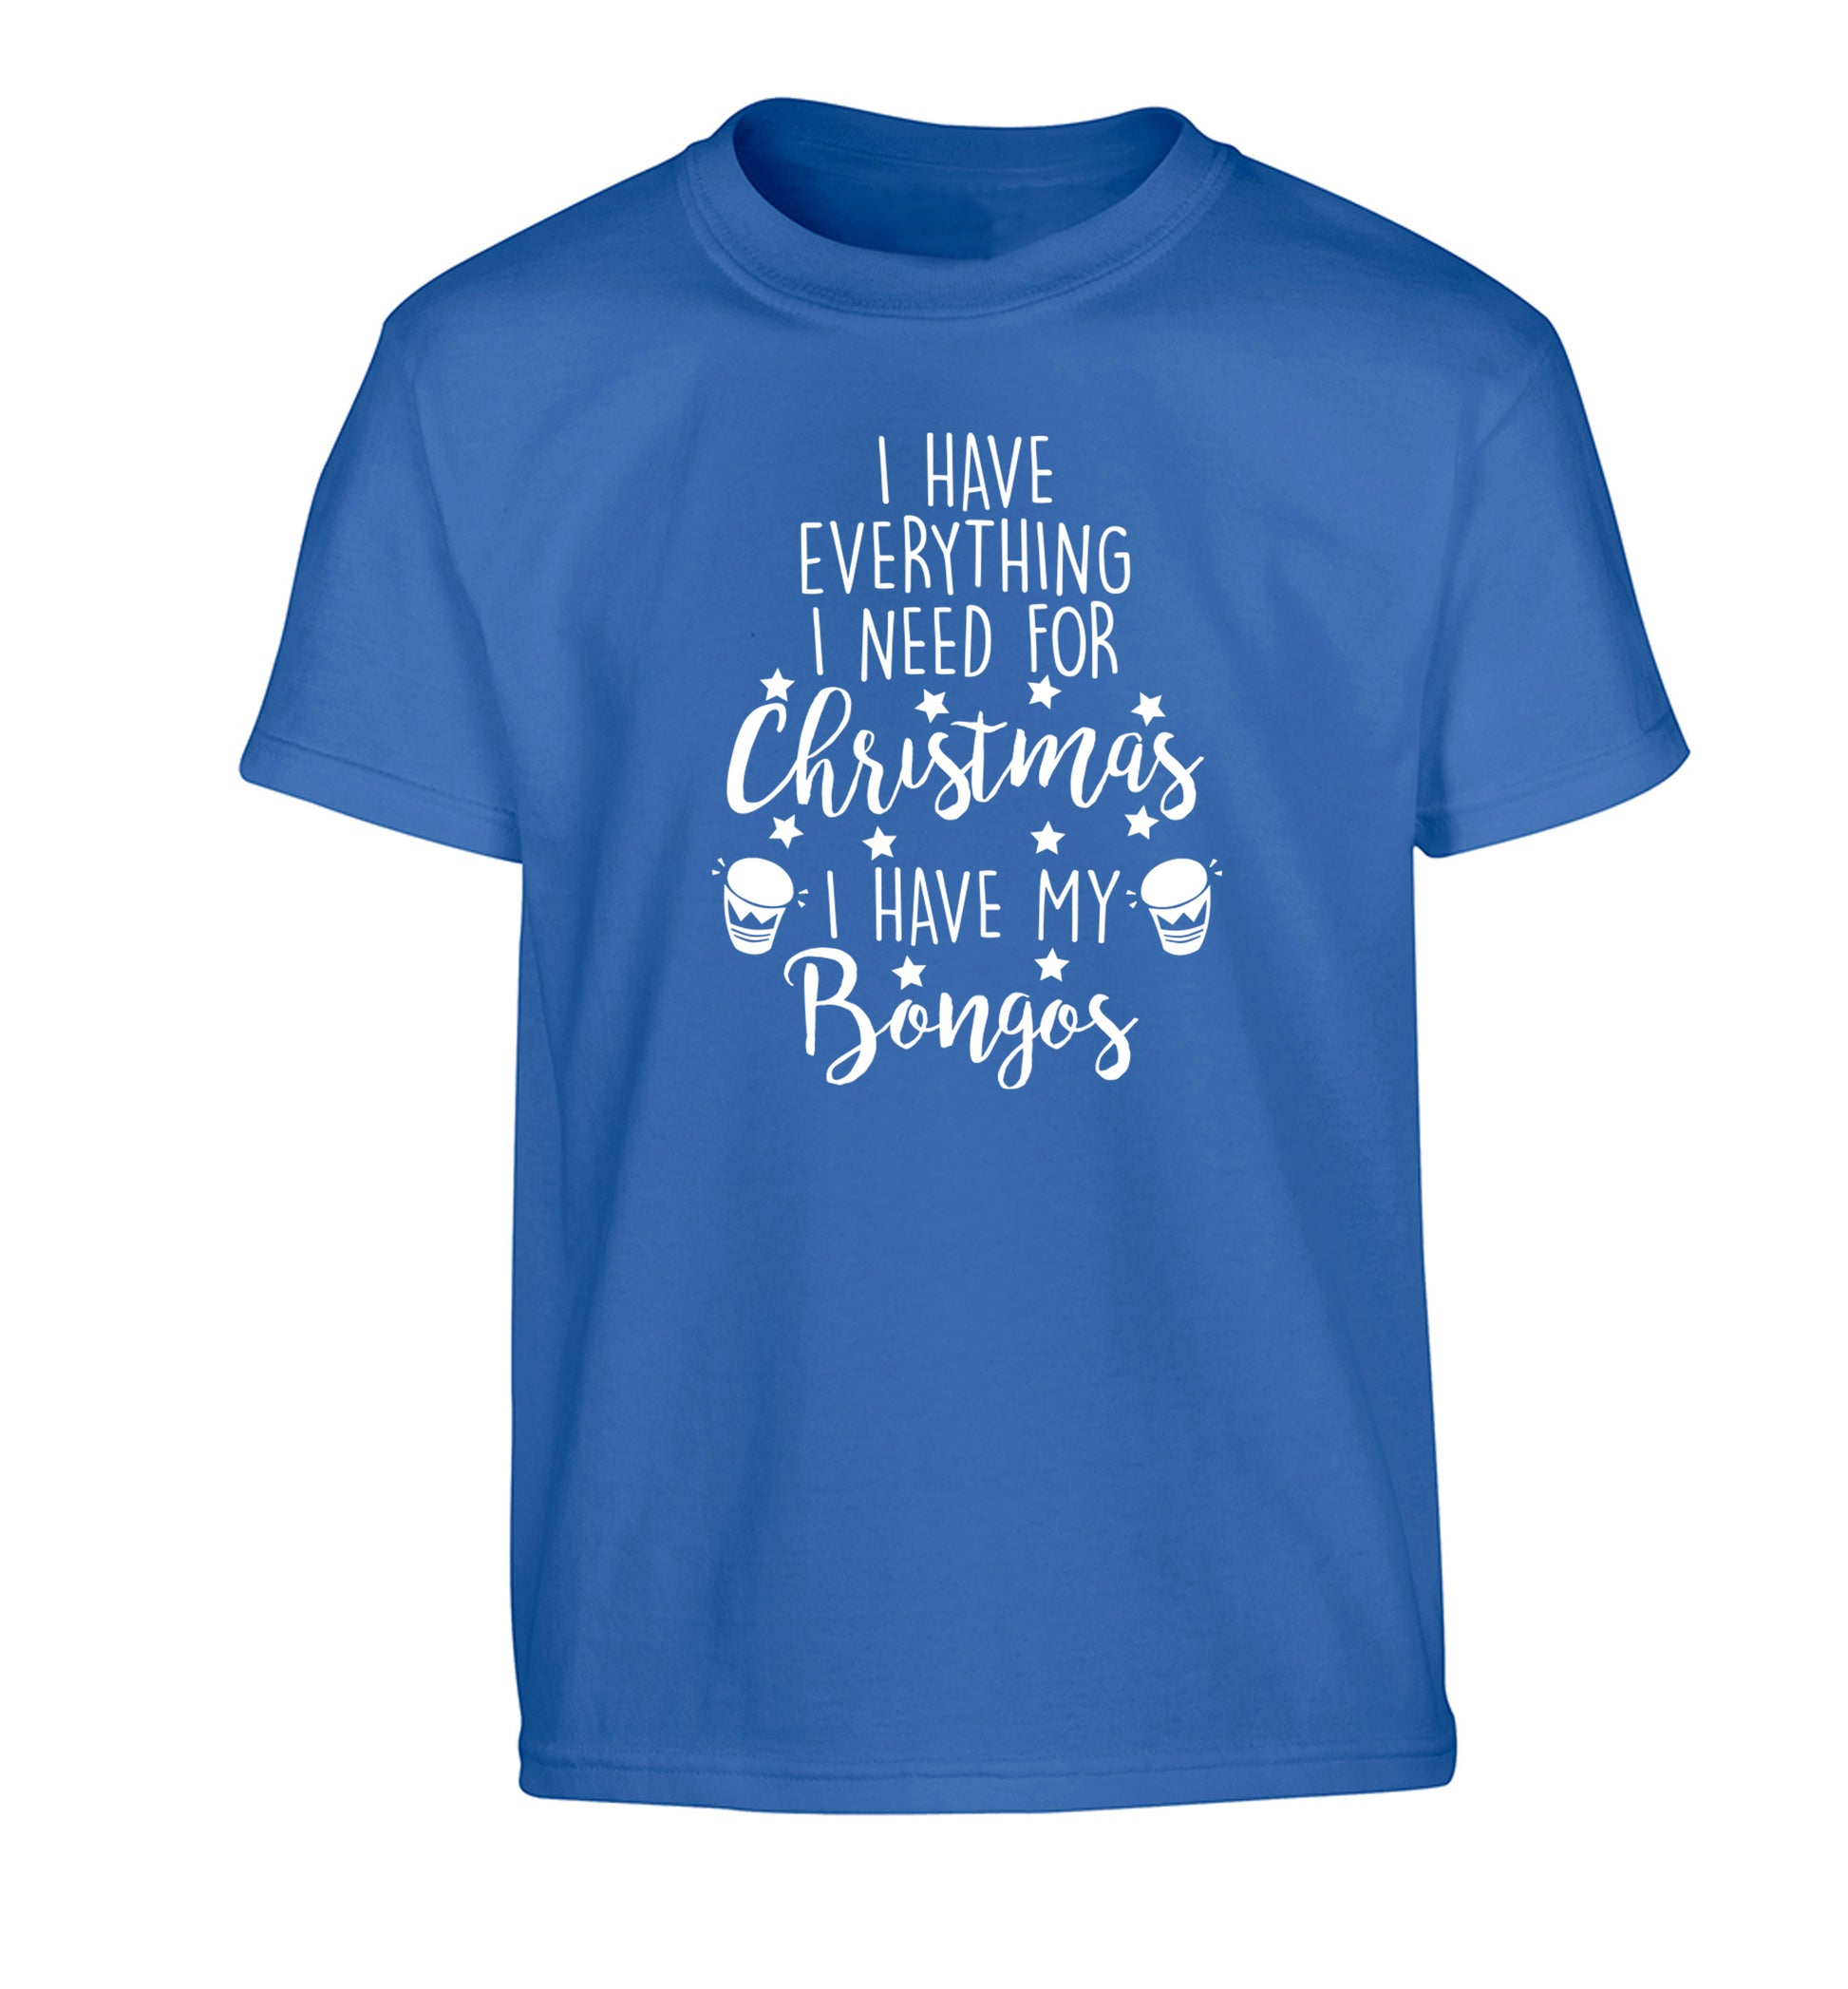 I have everything I need for Christmas I have my bongos! Children's blue Tshirt 12-14 Years